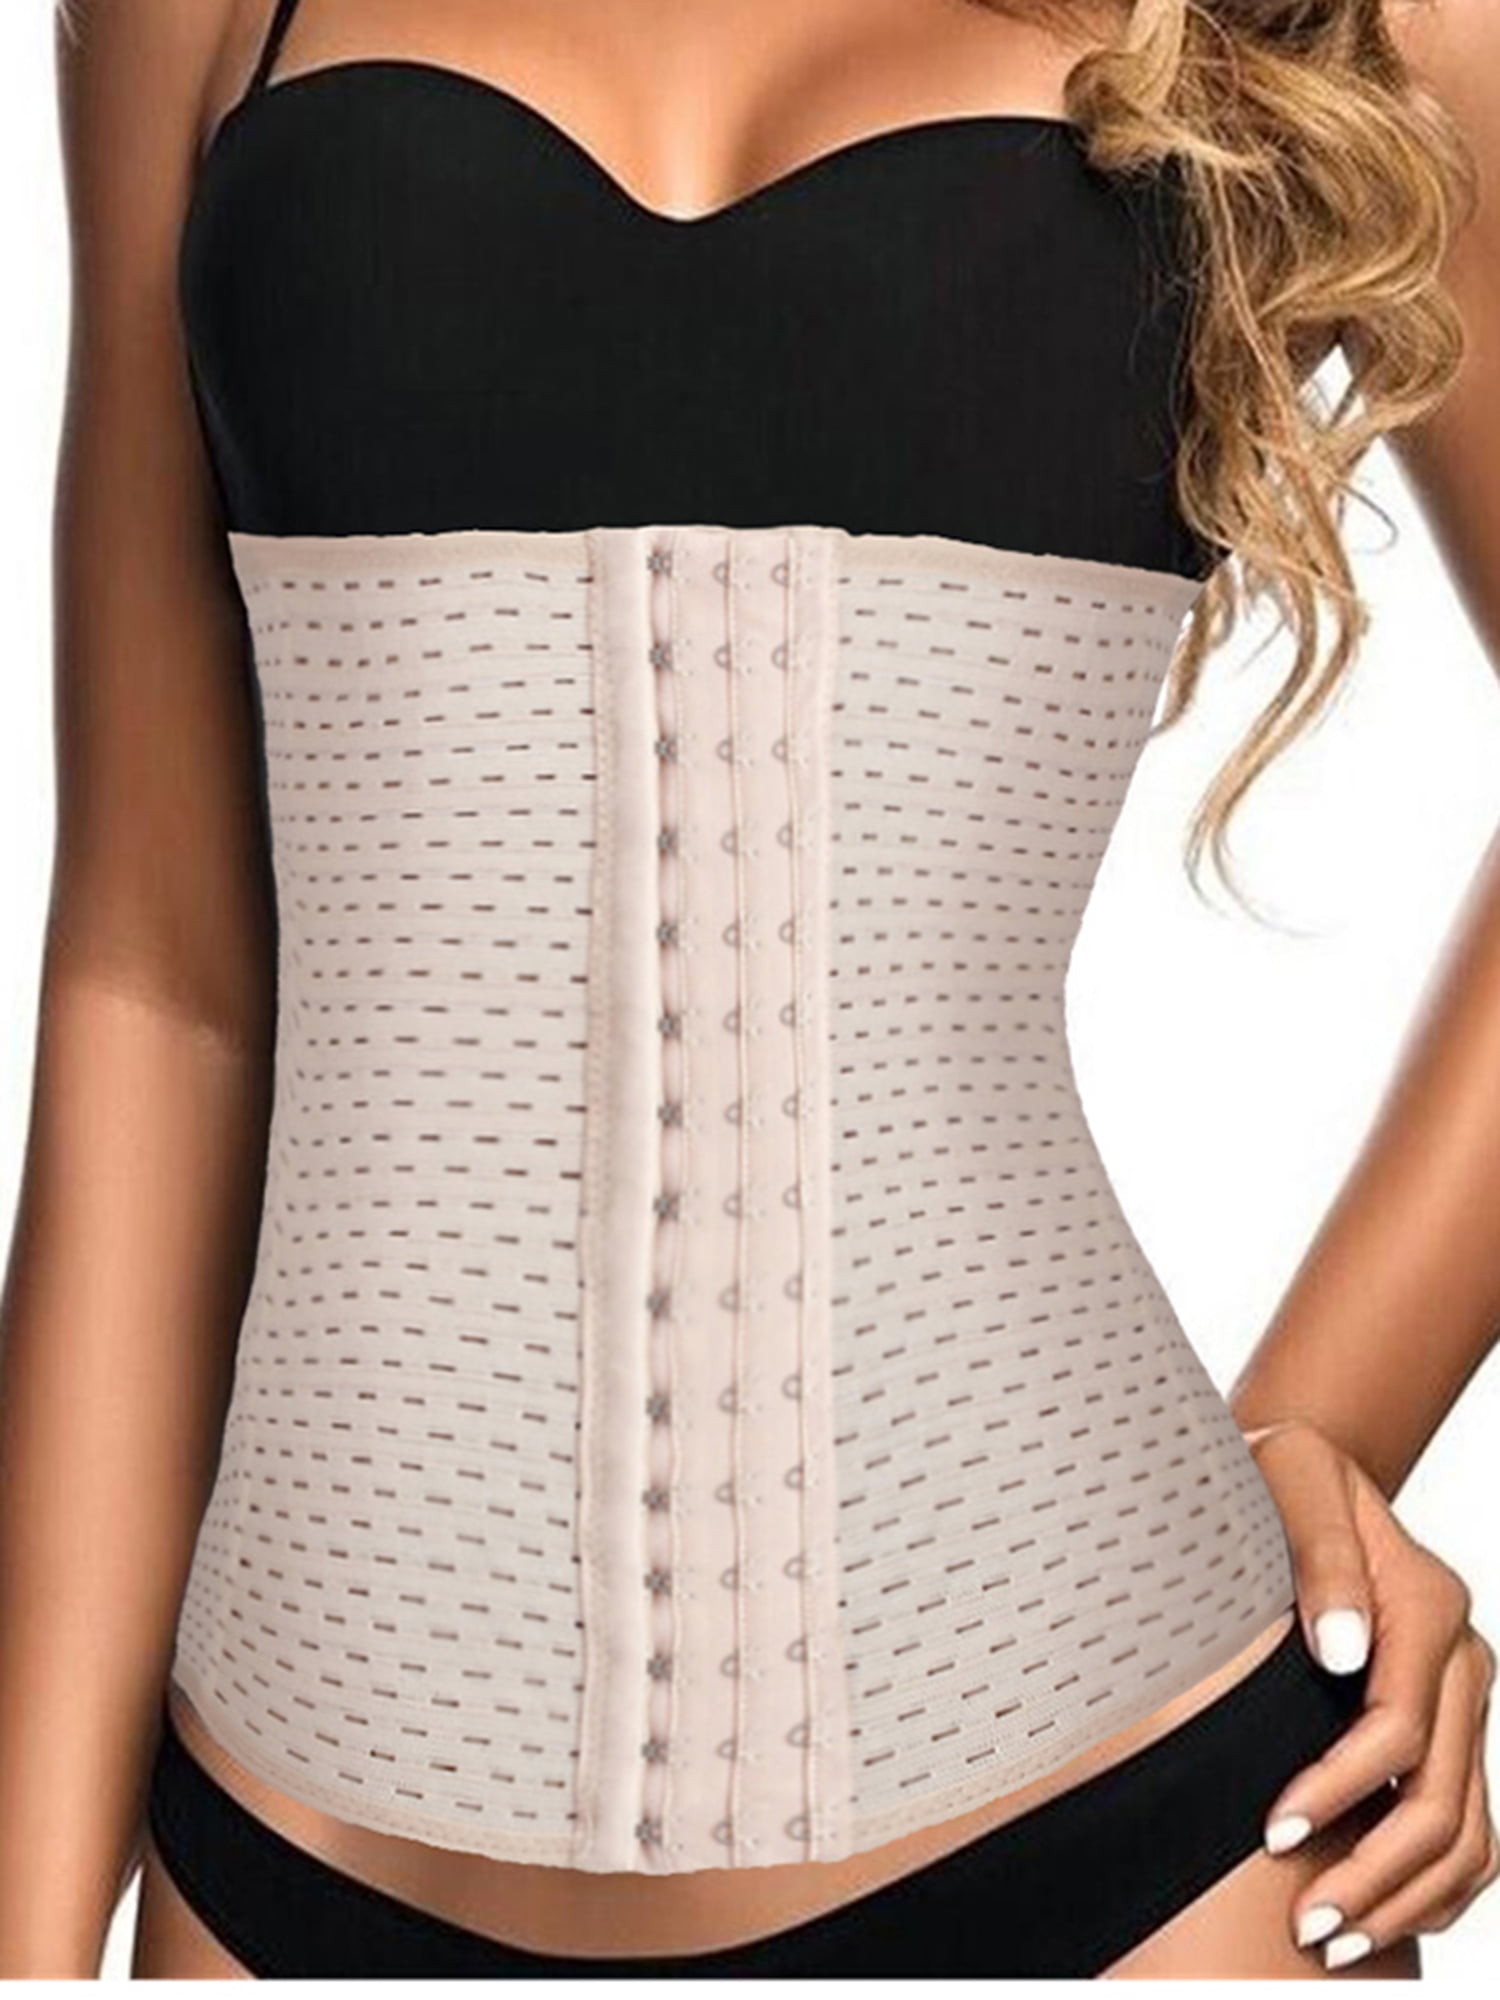 DODOING Weight Loss Body Shaper for Tummy Belly Waist Trainer Training Women 